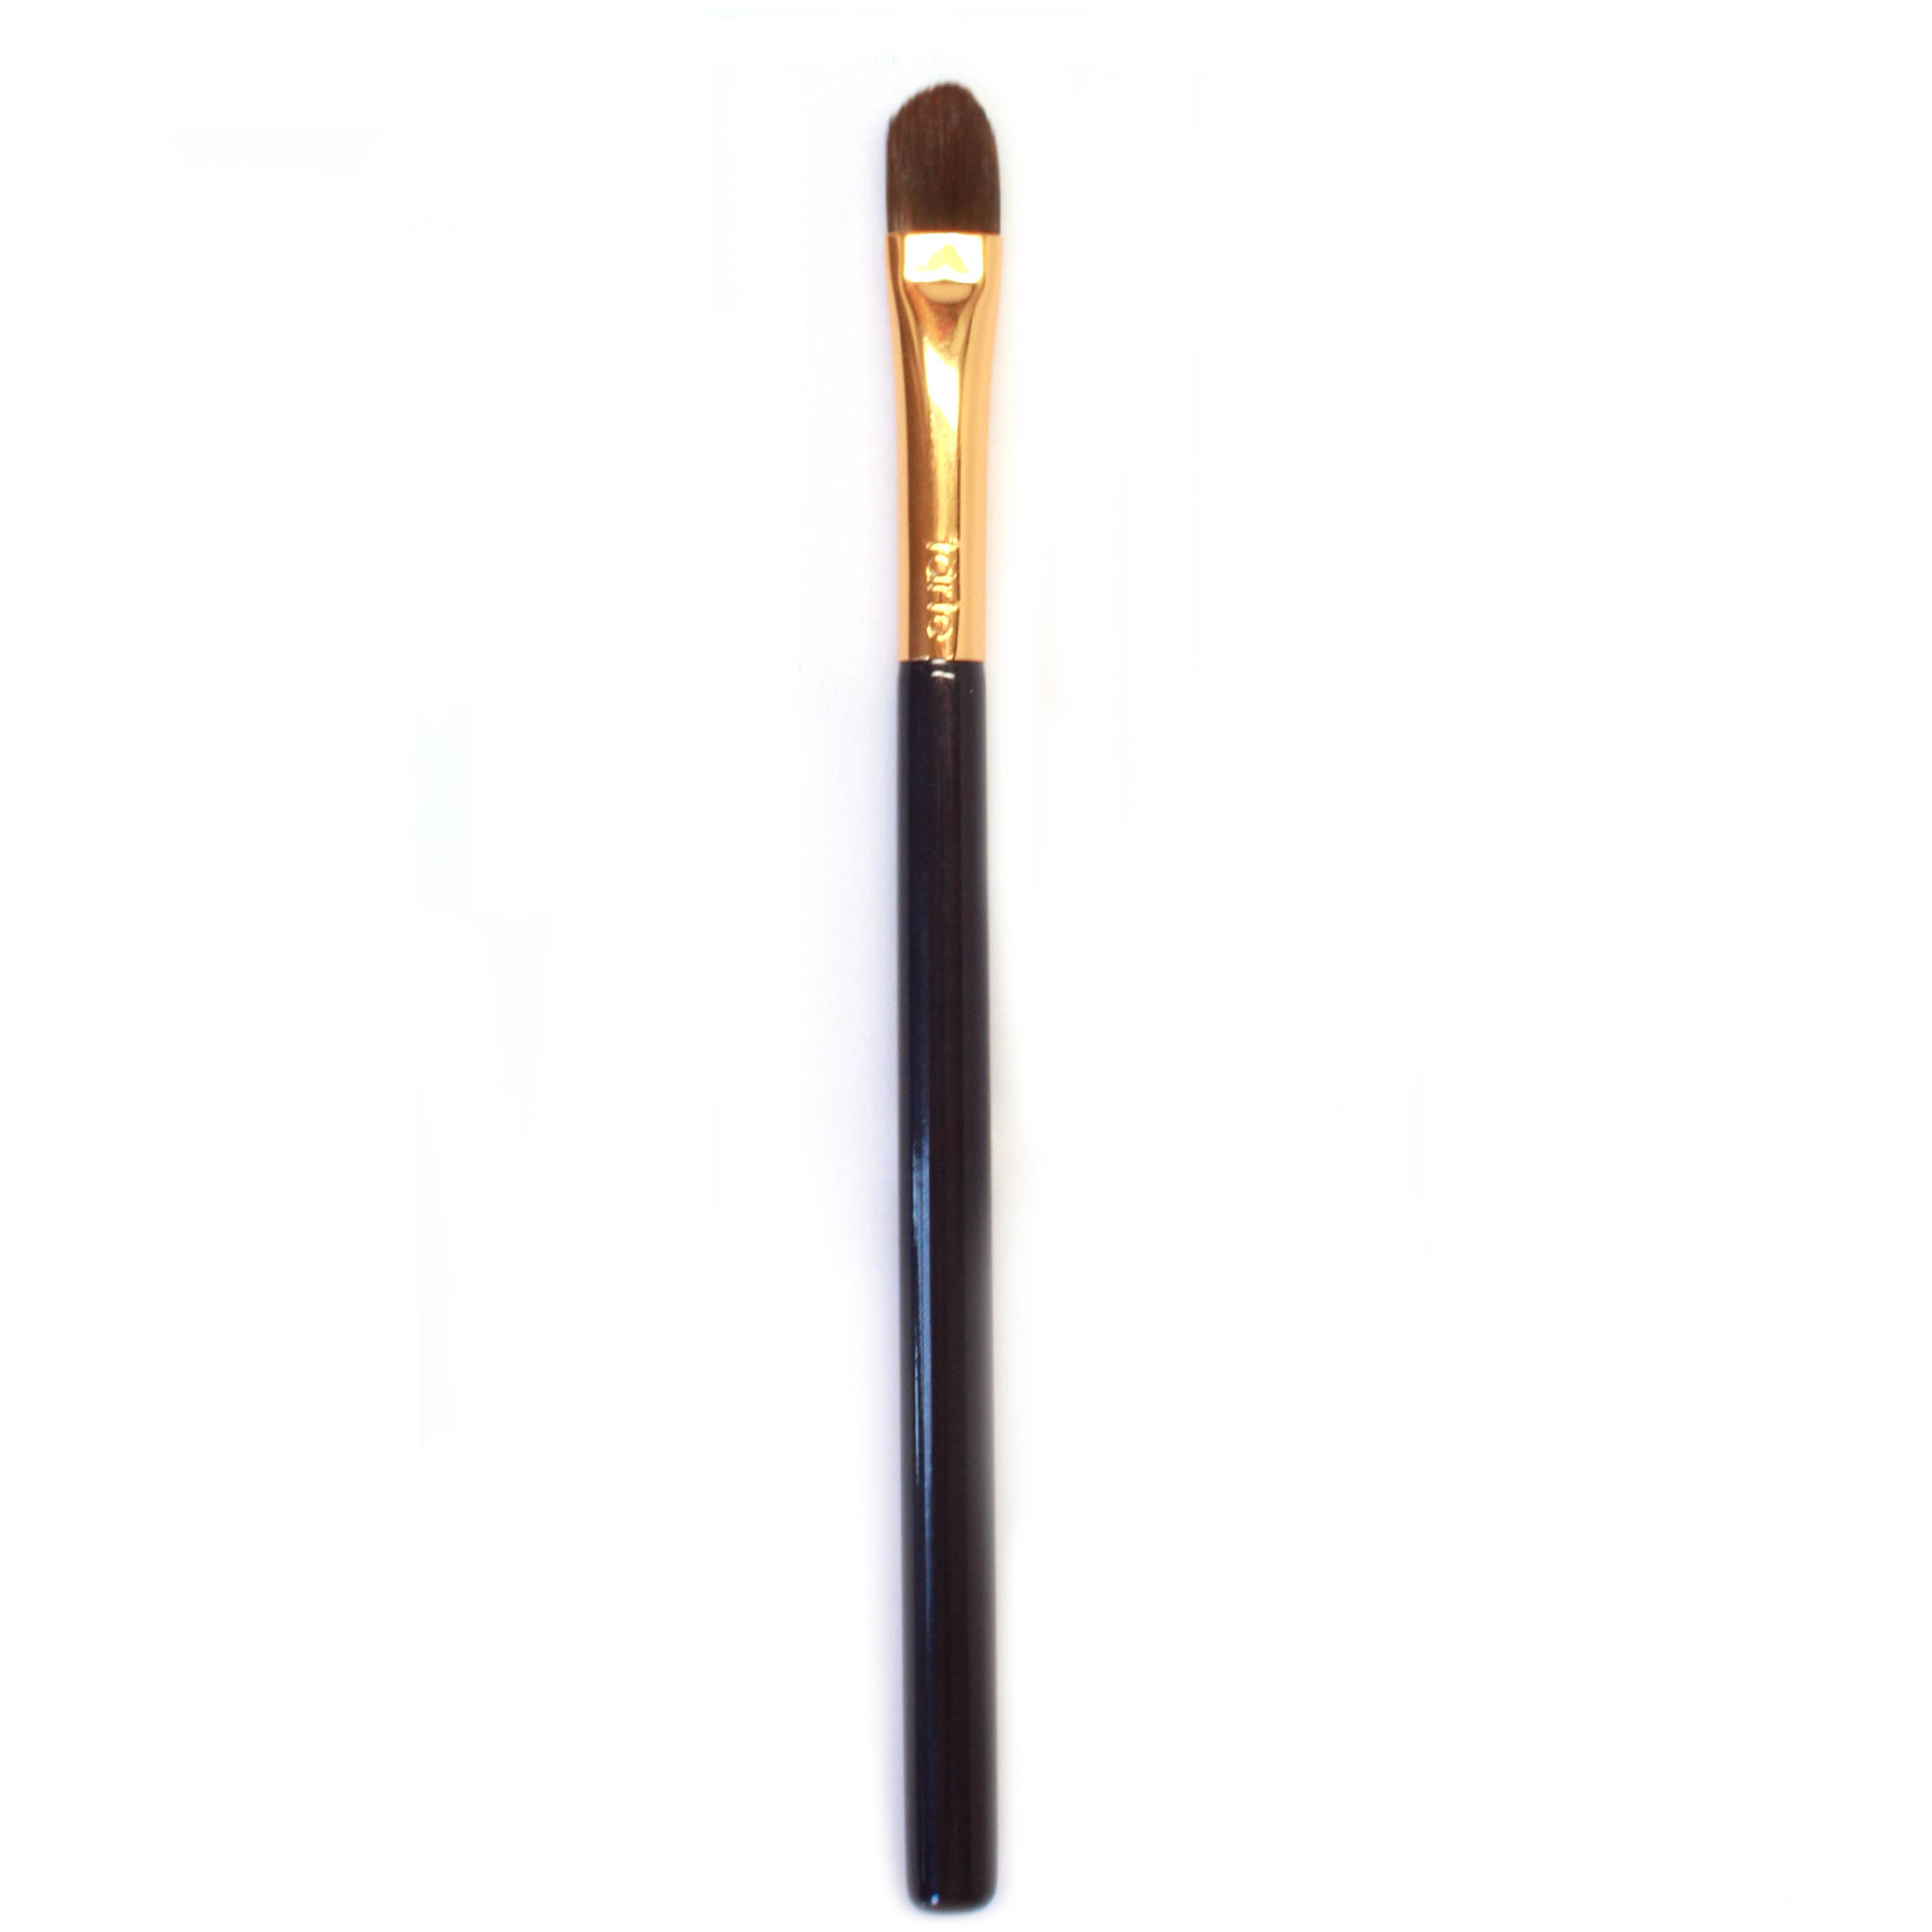 Tarte Limited Edition Gold Precise Application Brush